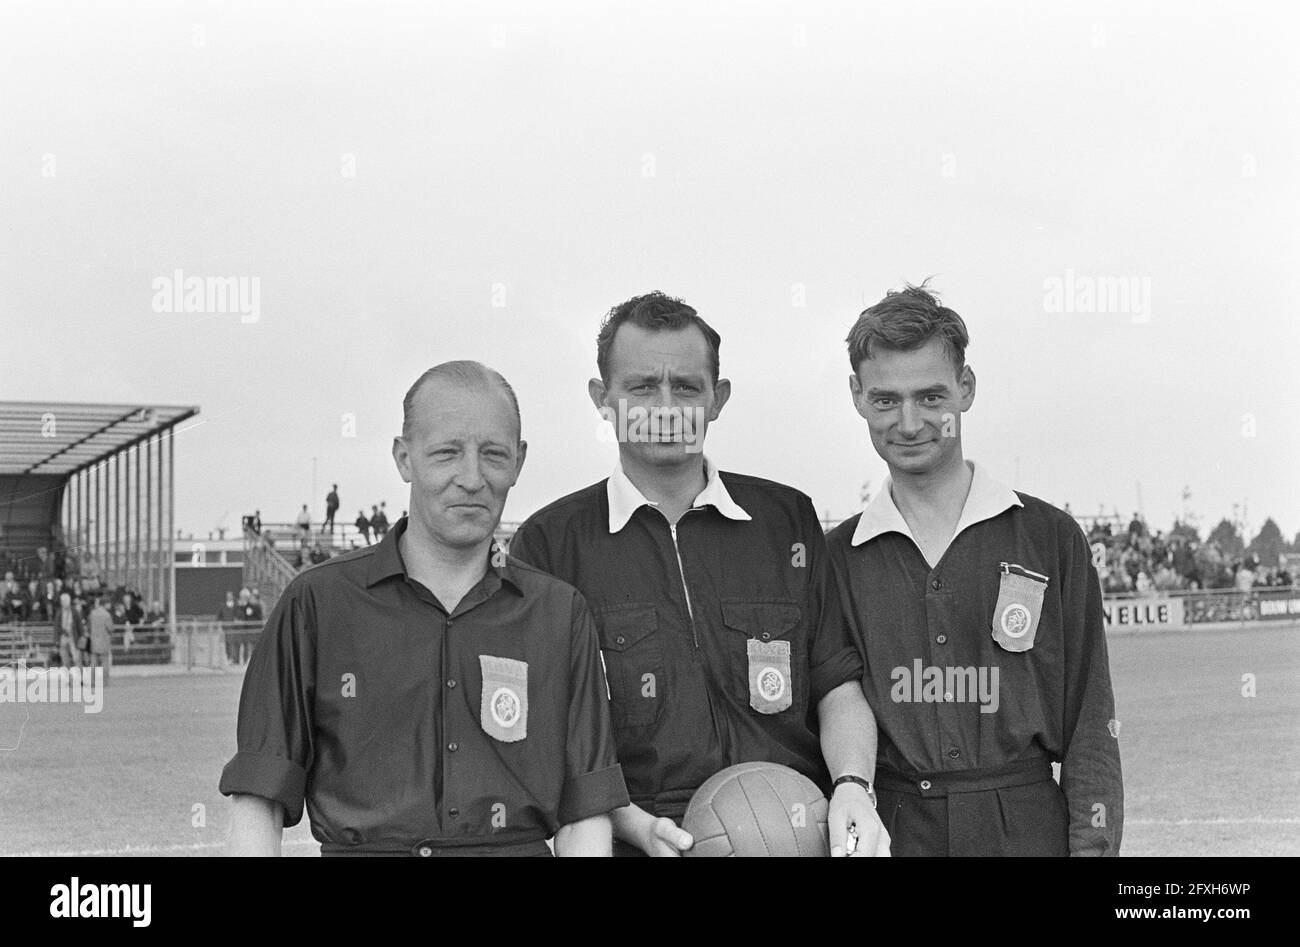 Volewijckers against RBC 1-4, number 6A referee B.L. Hoppenbrouwer (m), numbers 7 and 8 trainer De Bunser (Volenwijck), August 14, 1966, referees, sports, trainers, soccer, The Netherlands, 20th century press agency photo, news to remember, documentary, historic photography 1945-1990, visual stories, human history of the Twentieth Century, capturing moments in time Stock Photo